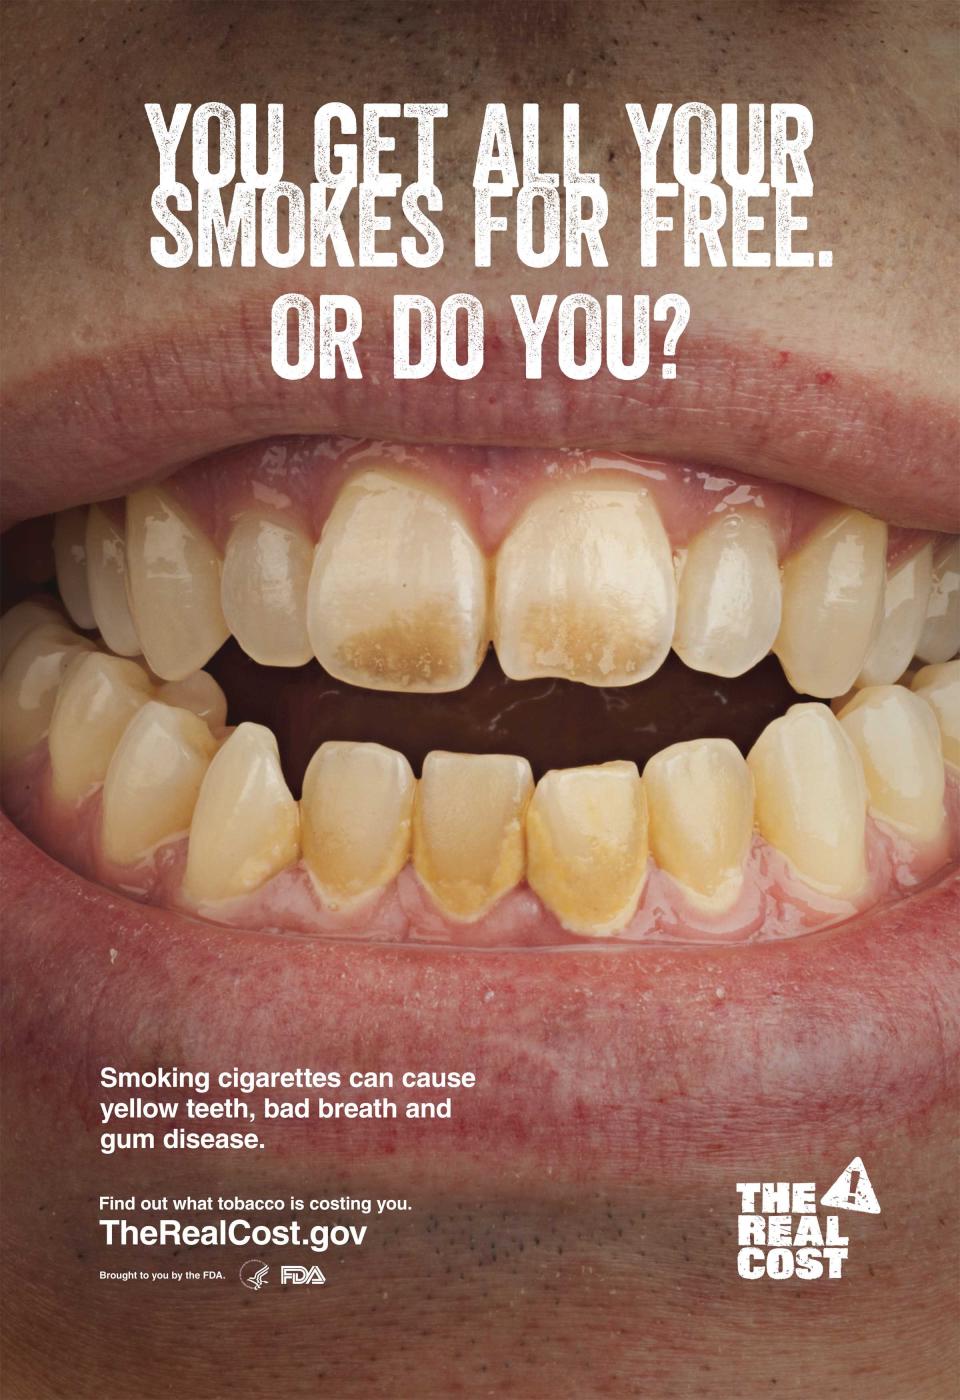 An anti-smoking poster issued by the U.S. Food and Drug Administration (FDA) is seen in an undated handout image. A major new anti-tobacco campaign will be launched in the United States next week aimed at vulnerable teenagers on the cusp of becoming addicted to cigarettes. The $115 million campaign by the Food and Drug Administration will target the 10 million people aged 12 to 17 who are open to trying cigarettes or who are already experimenting with them and are in danger of becoming regular smokers, the FDA said. REUTERS/FDA/Handout via Reuters (UNITED STATES - Tags: HEALTH POLITICS BUSINESS) ATTENTION EDITORS - FOR EDITORIAL USE ONLY. NOT FOR SALE FOR MARKETING OR ADVERTISING CAMPAIGNS. THIS IMAGE HAS BEEN SUPPLIED BY A THIRD PARTY. IT IS DISTRIBUTED, EXACTLY AS RECEIVED BY REUTERS, AS A SERVICE TO CLIENTS